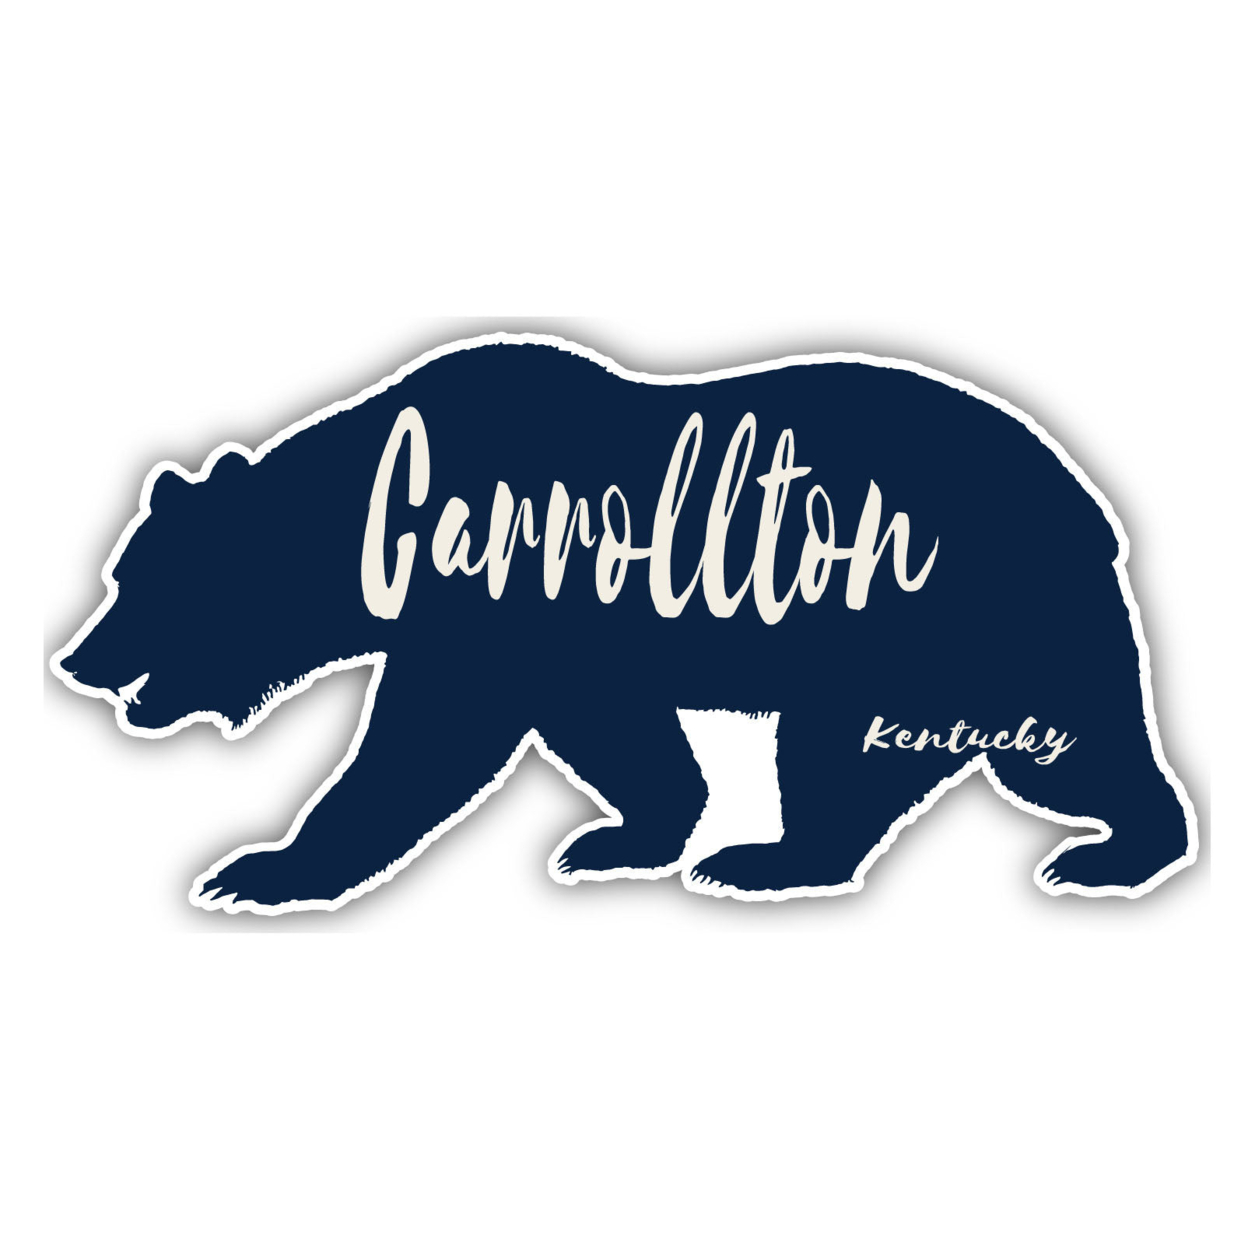 Carrollton Kentucky Souvenir Decorative Stickers (Choose Theme And Size) - 4-Pack, 12-Inch, Great Outdoors